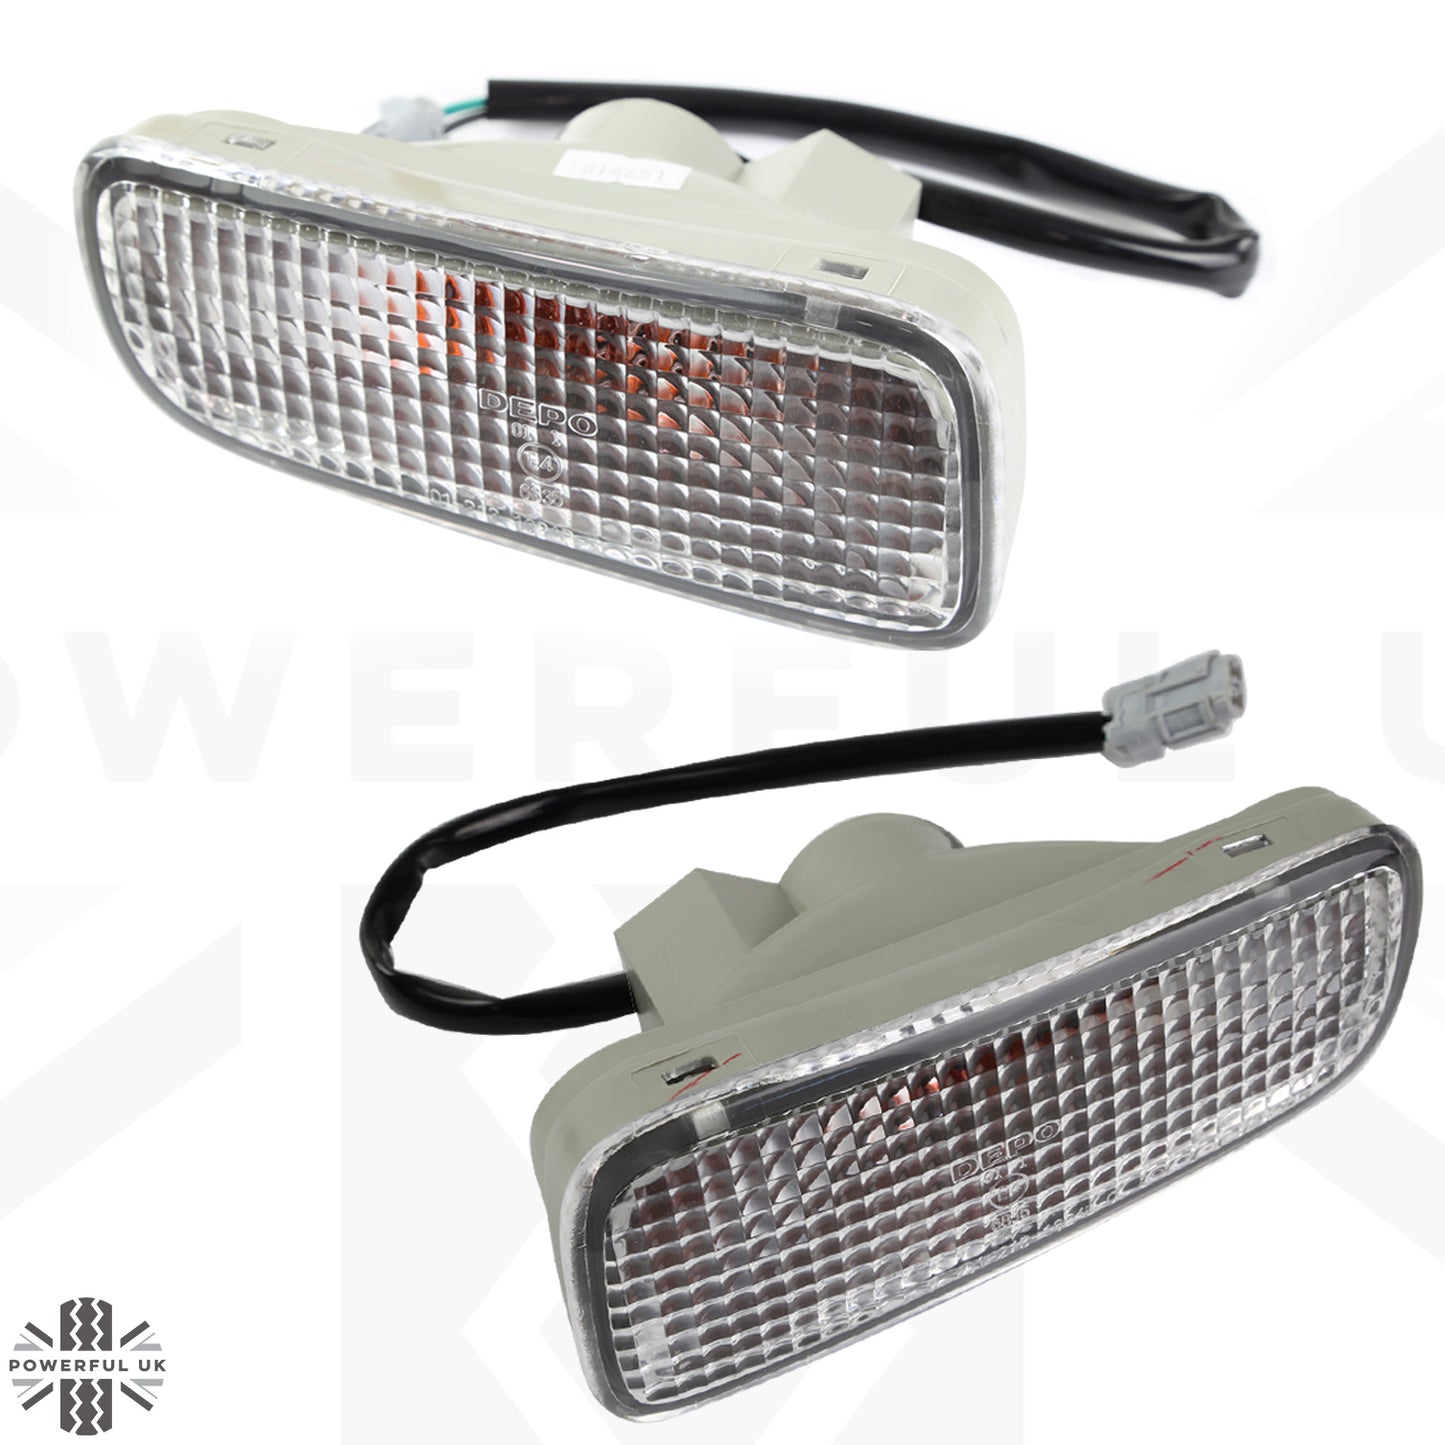 Isuzu TF Clear Front Indicator Light Assembly - Curved Oval Type - E Marked - PAIR